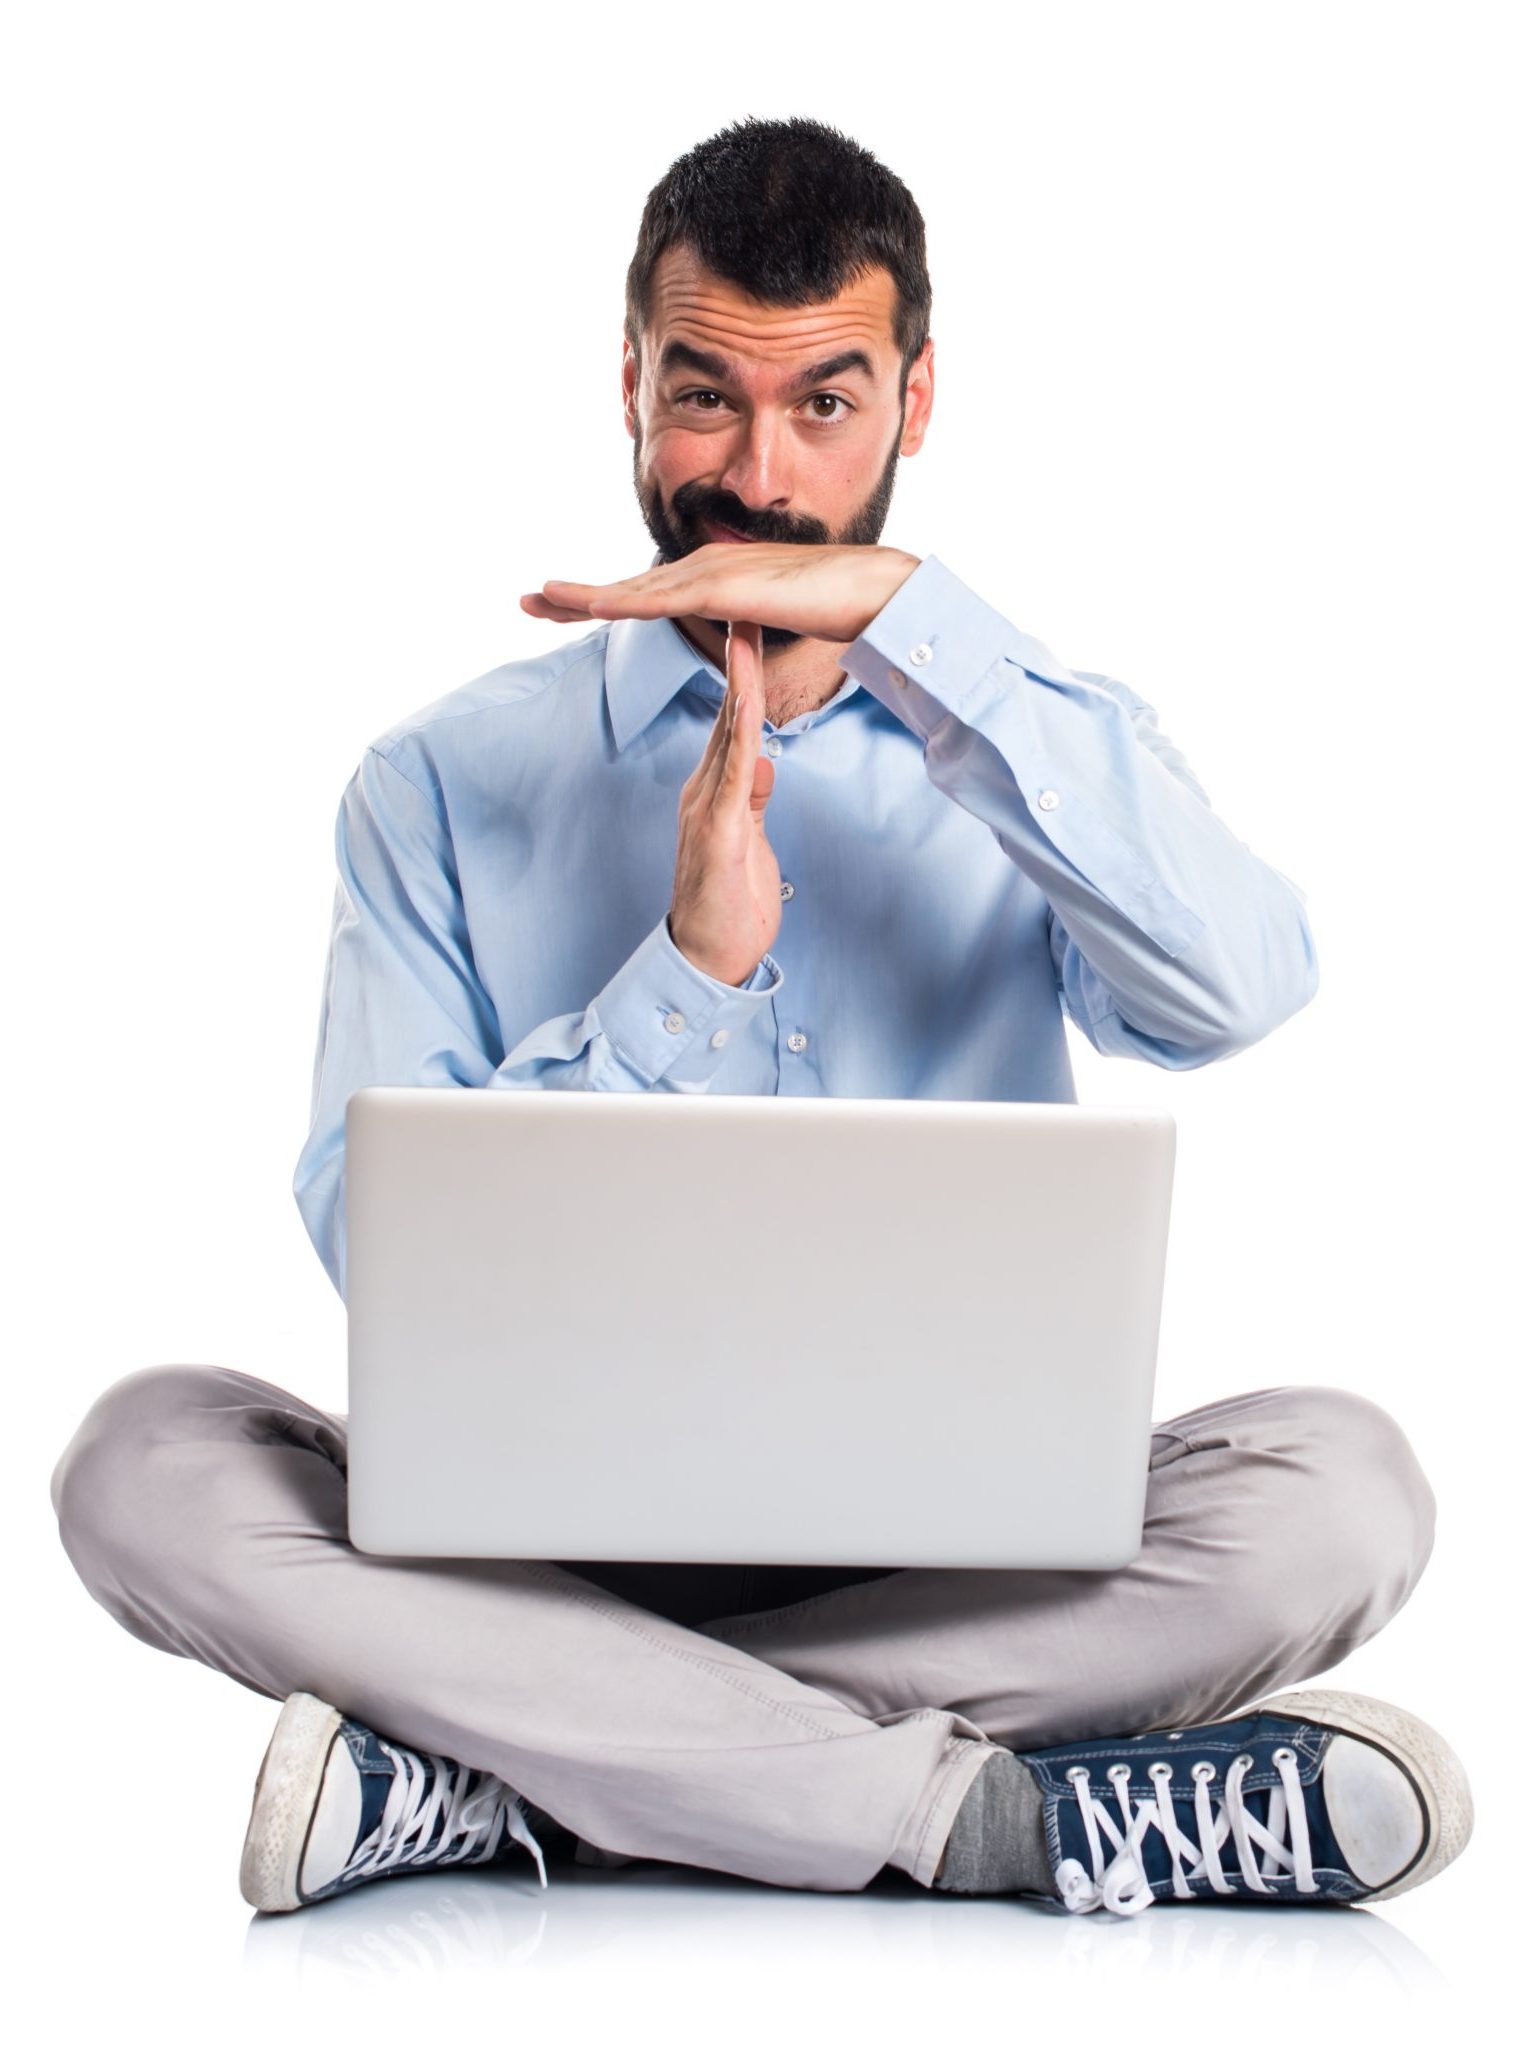 Man with laptop making time out gesture